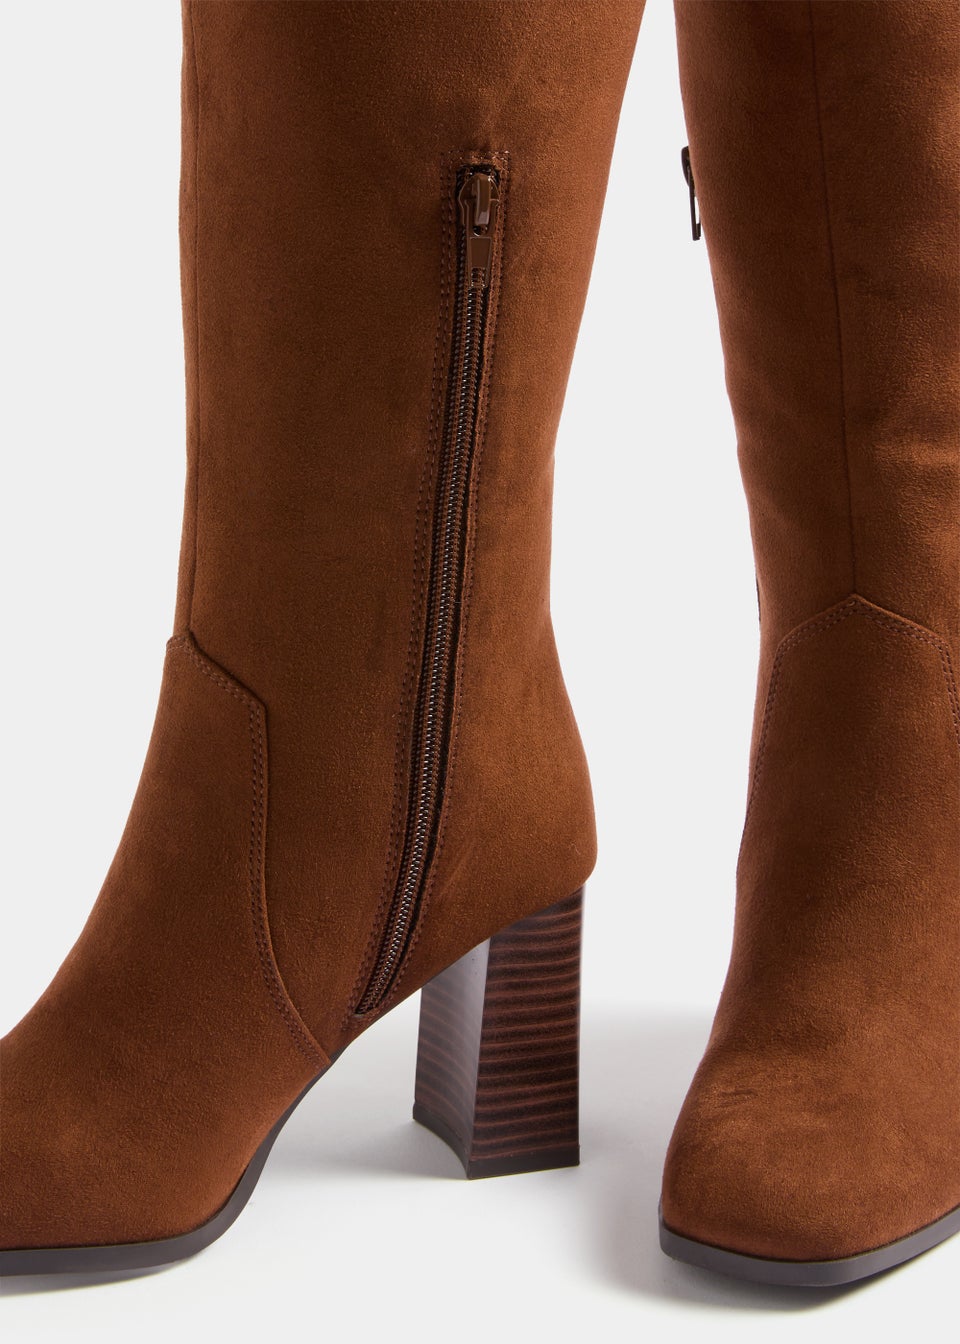 Et Vous Brown Knee High Boots